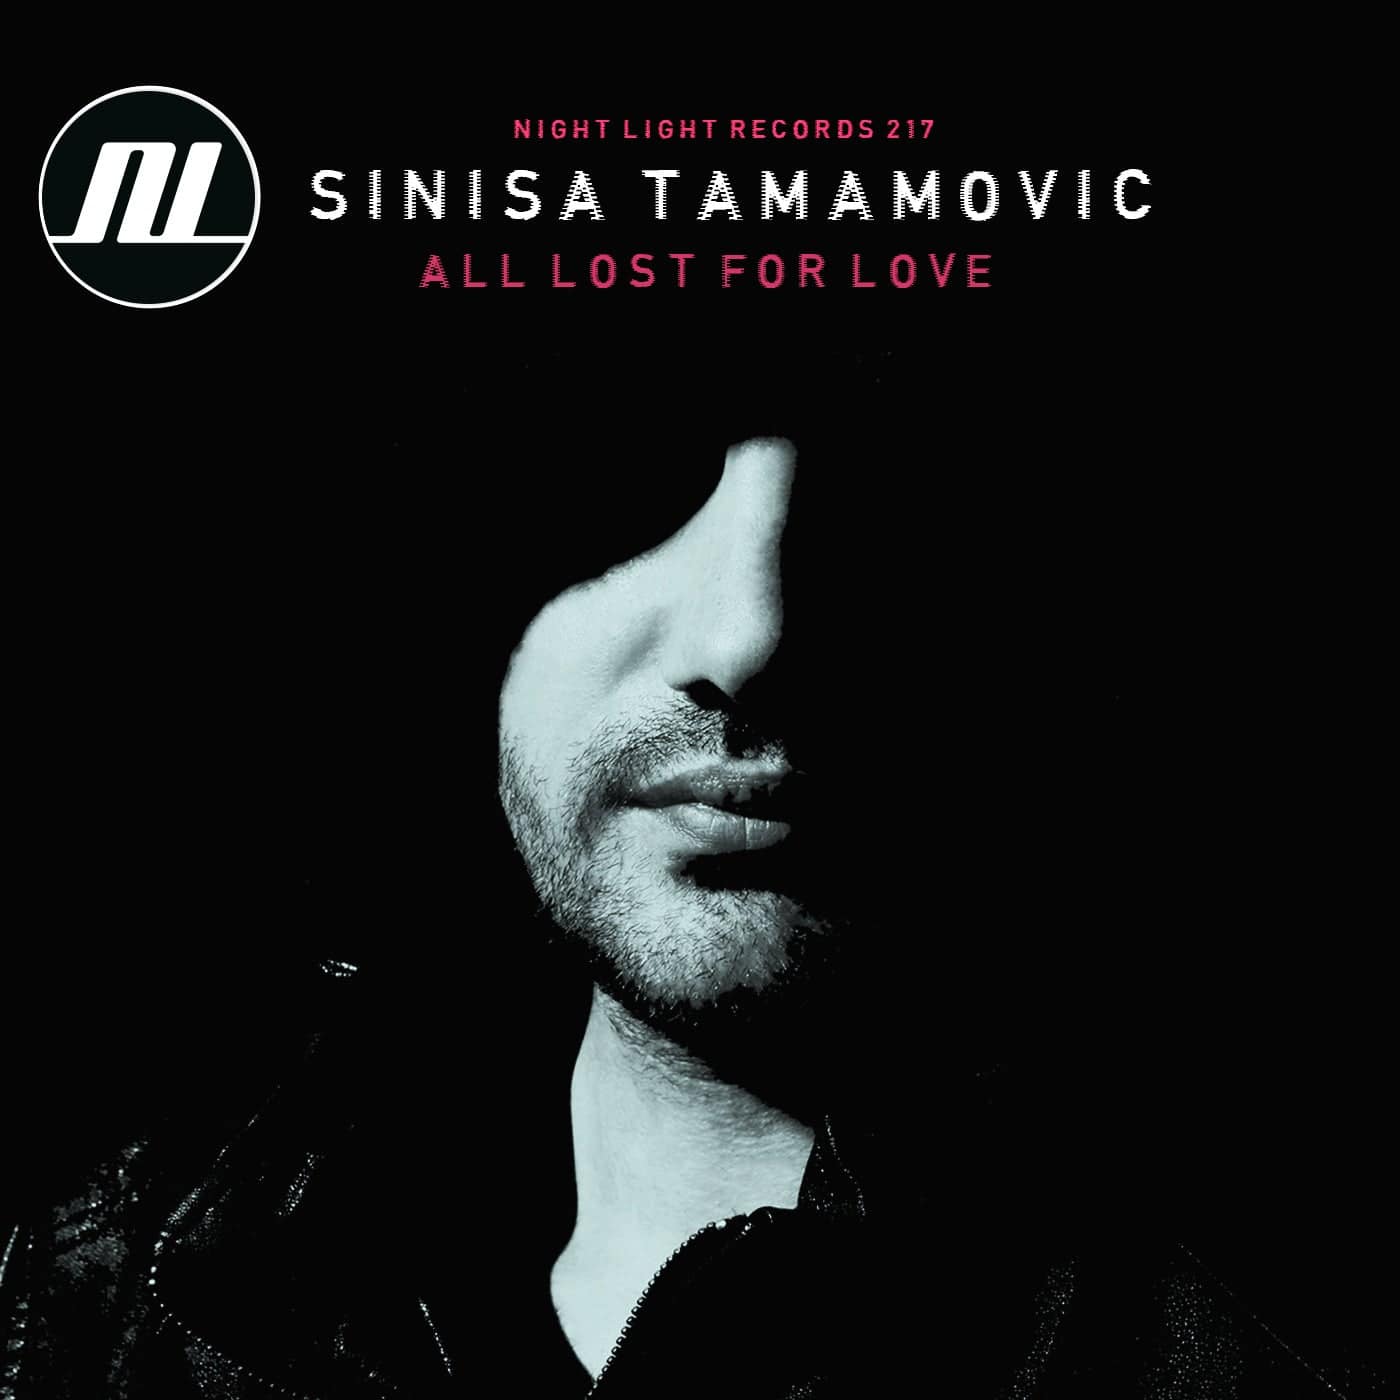 image cover: Sinisa Tamamovic - All Lost For Love EP / NLD217